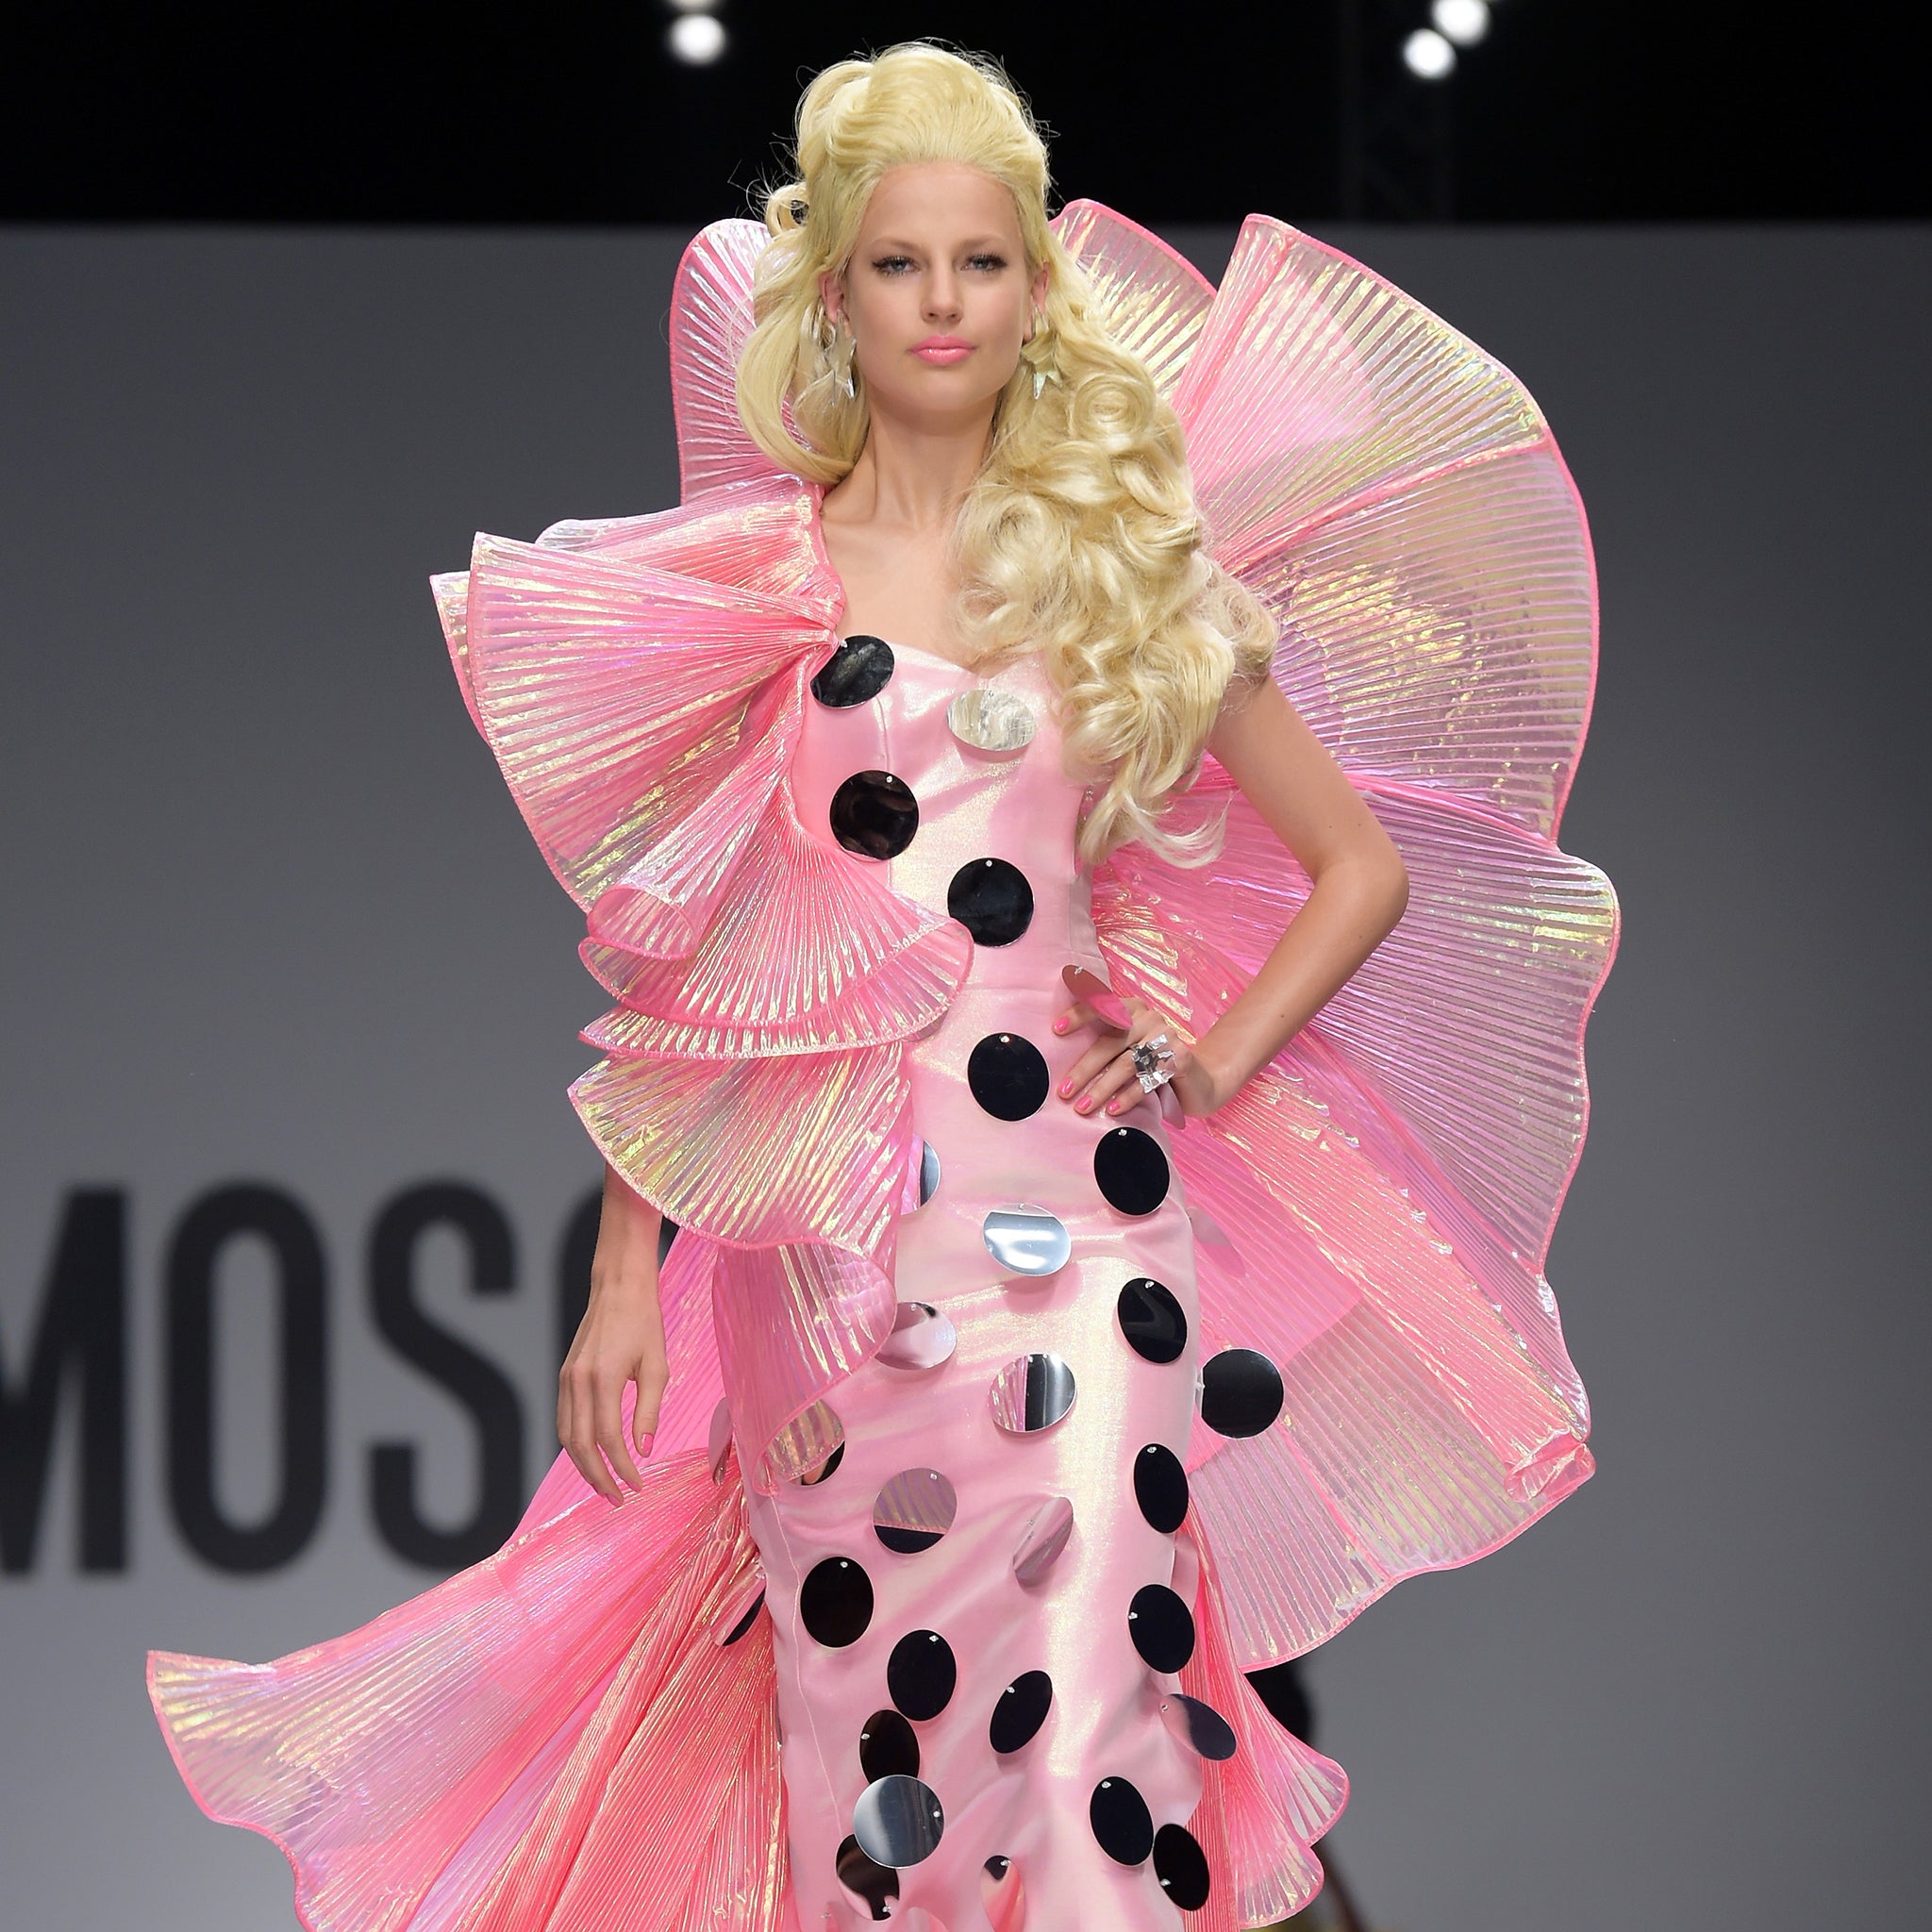 A model walks the runway during the Moschino show as a part of Milan Fashion Week Womenswear Spring/Summer 2015